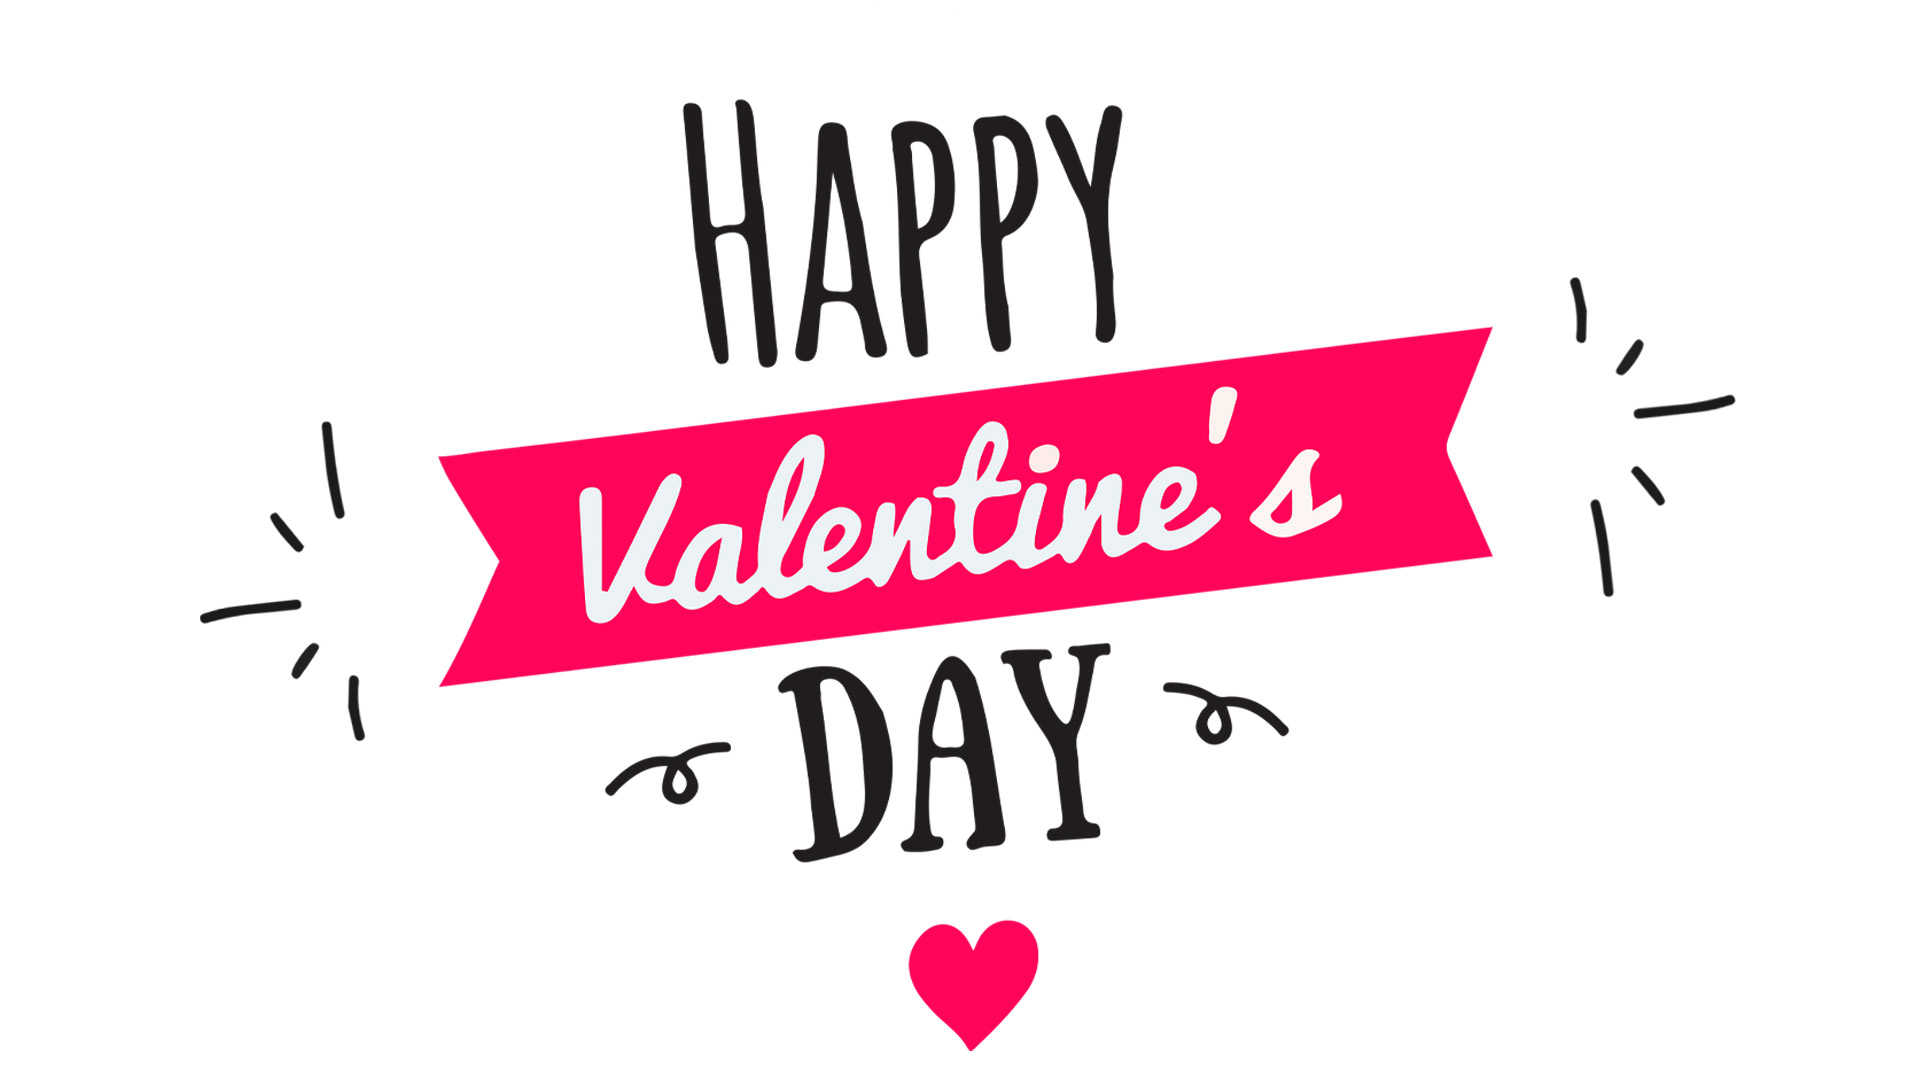 White background with black and pink decorative handwritten text that reads "Happy Valentine's Day"